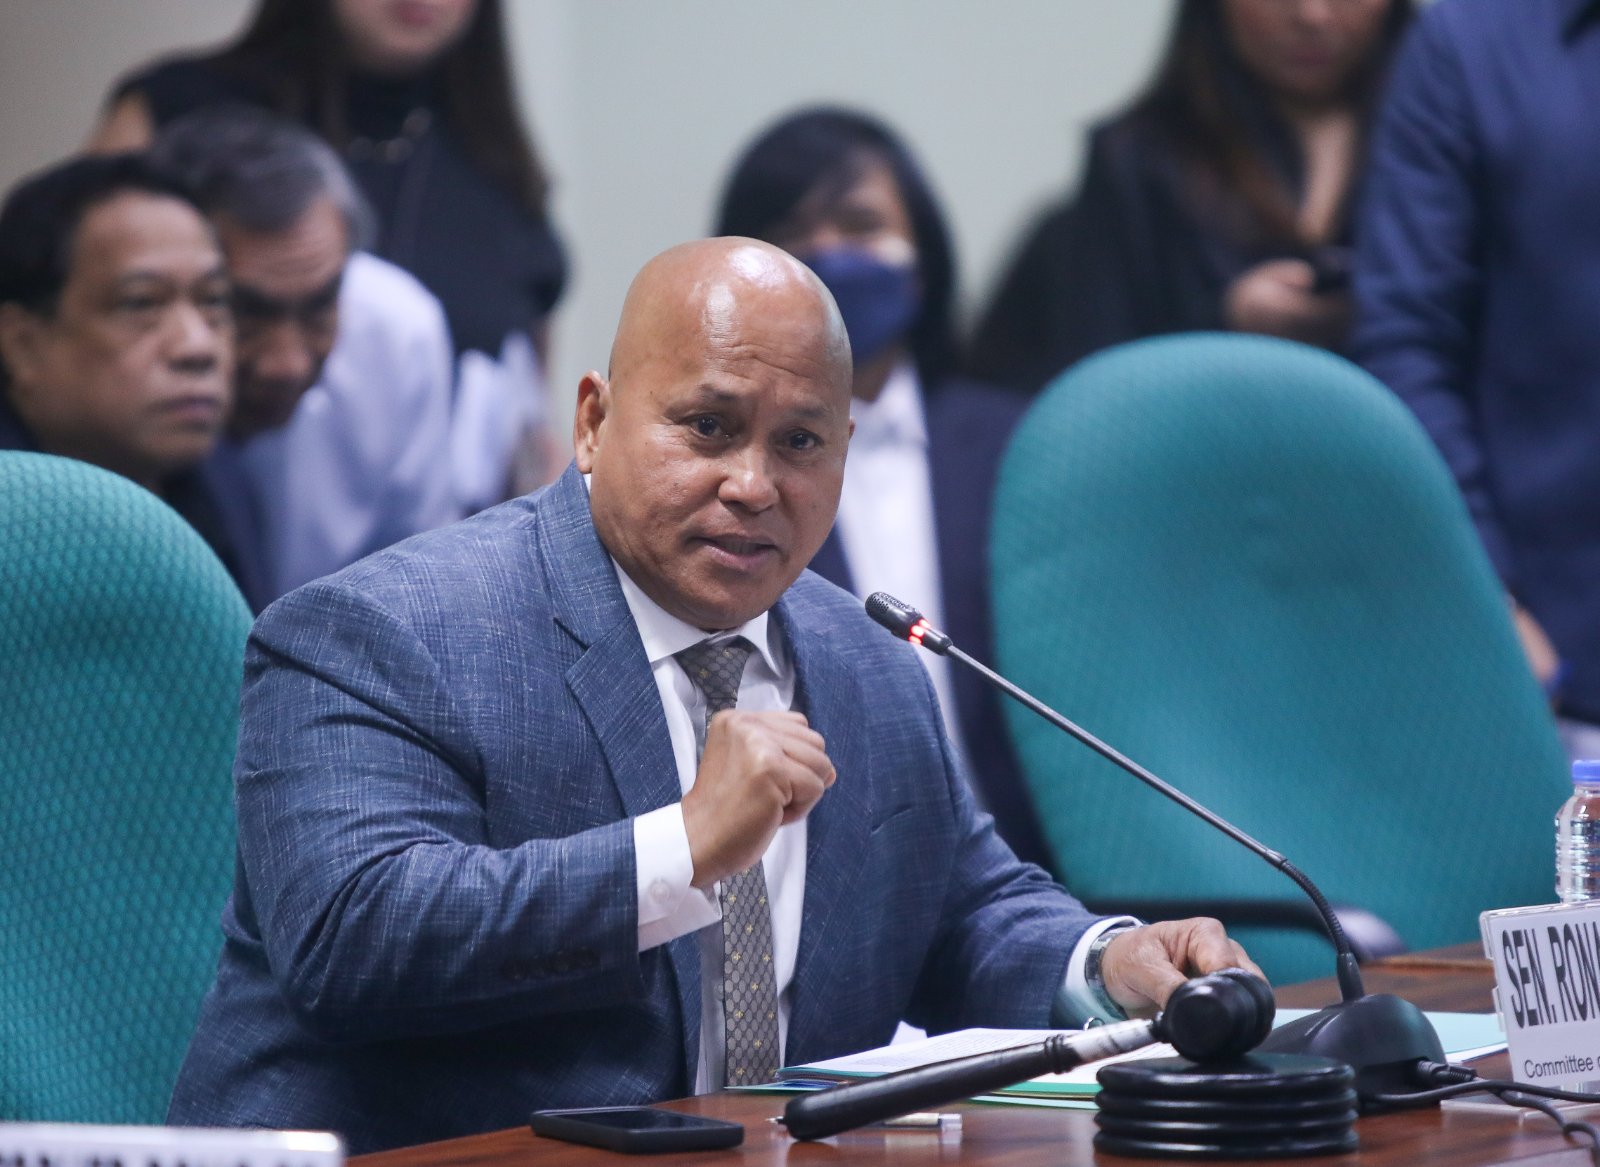 A fuming Senator Ronald "Bato" dela Rosa couldn't help but glare at Antonio Trillanes IV on Tuesday, daring the former senator to personally handcuff him should the ICC begin issuing arrest warrants.